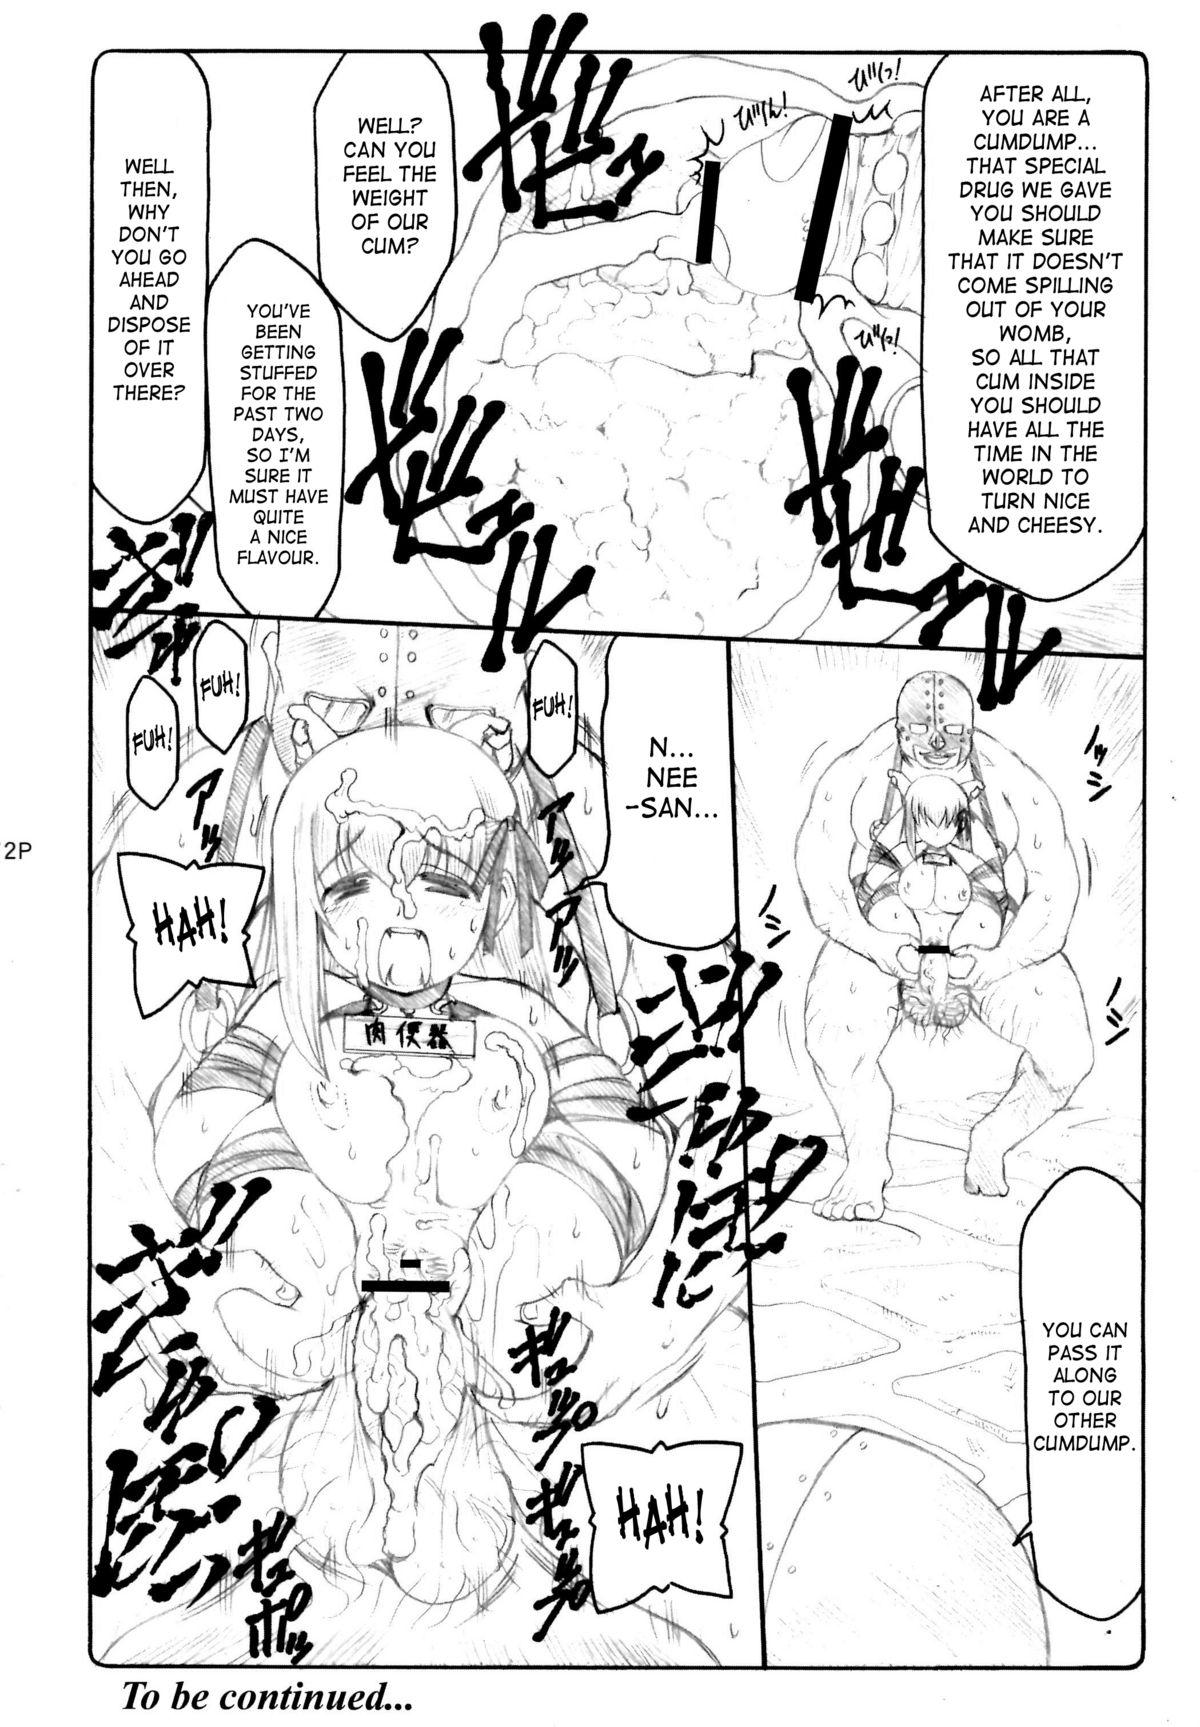 Kotori 4 & 6 Extra Pages 4